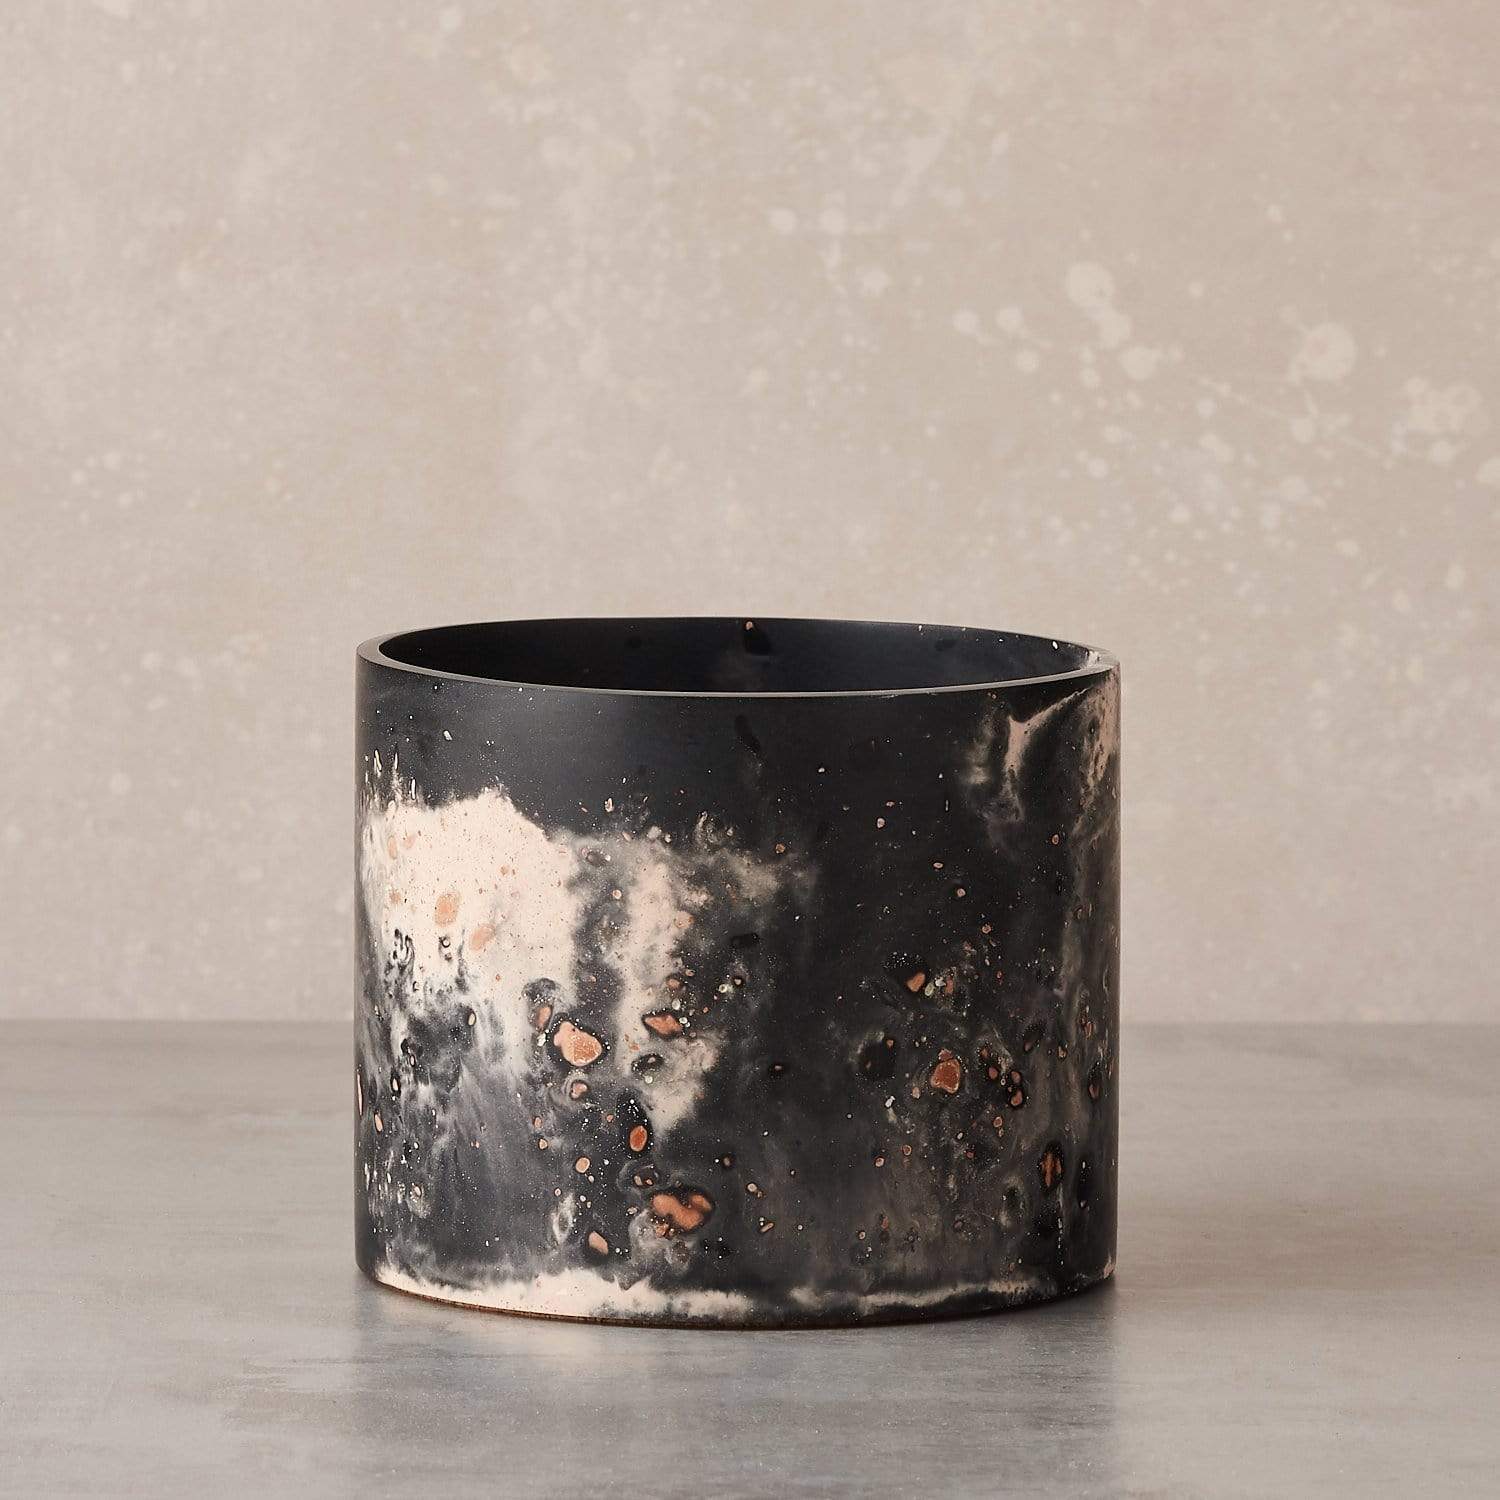 Tip Studio Vessel Black pigment and recycled terracotta Medium Cylinder Vessel (various colours)